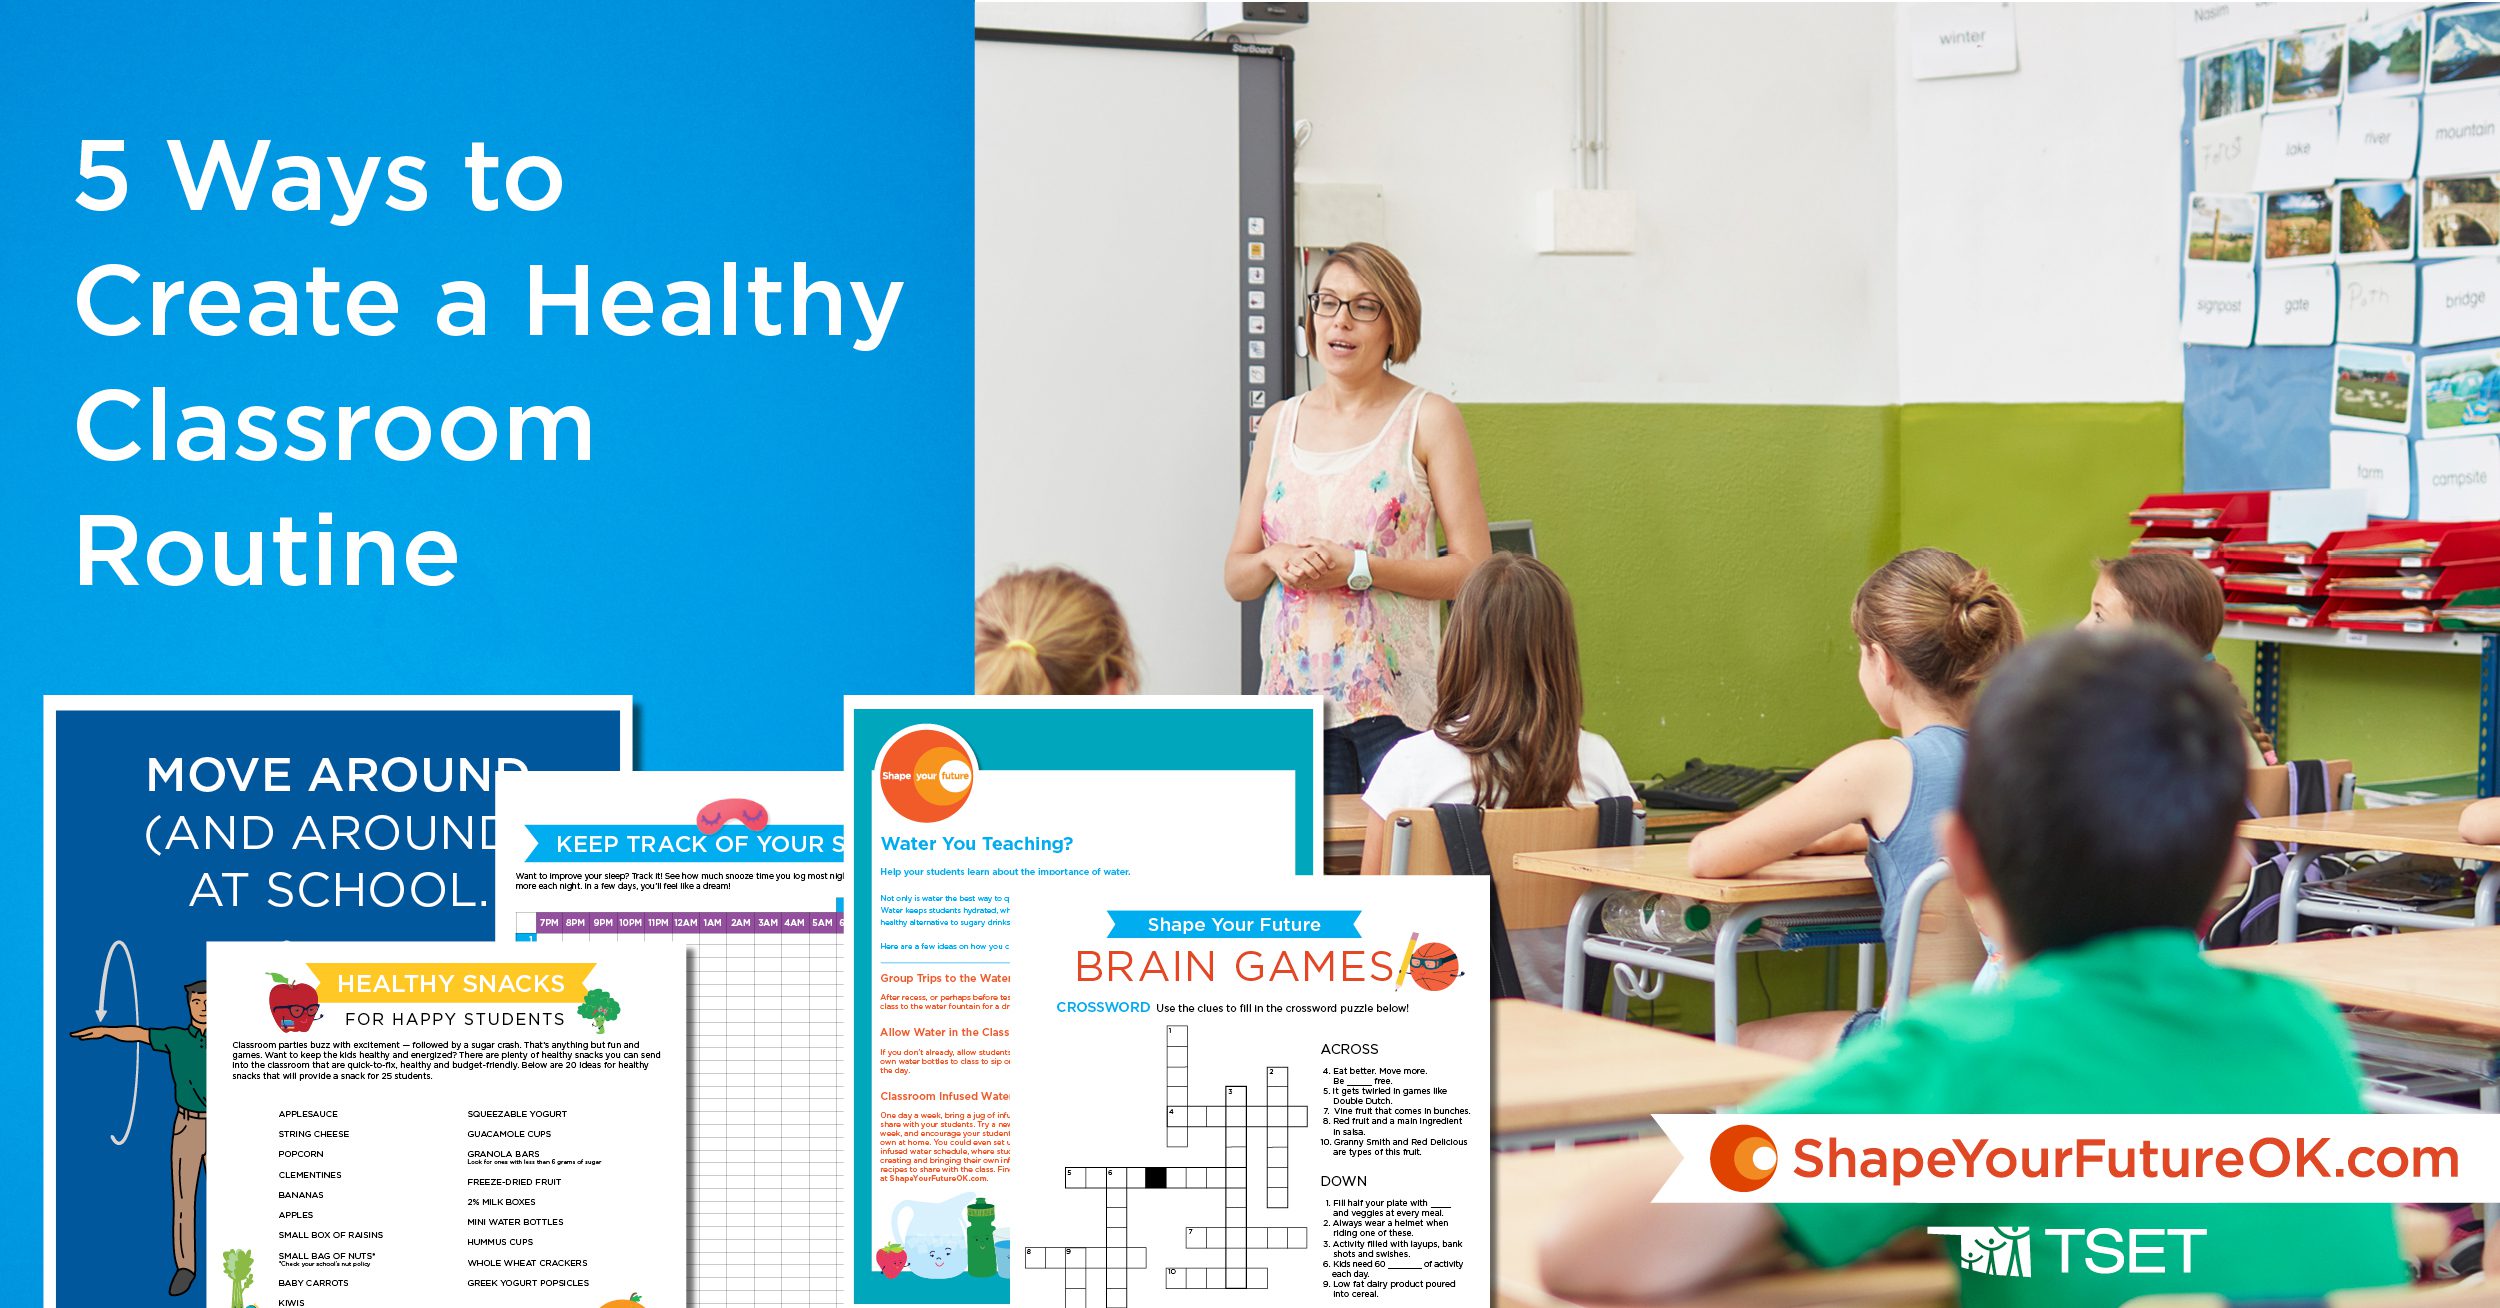 5 Ways to Create a Healthy Classroom This Spring